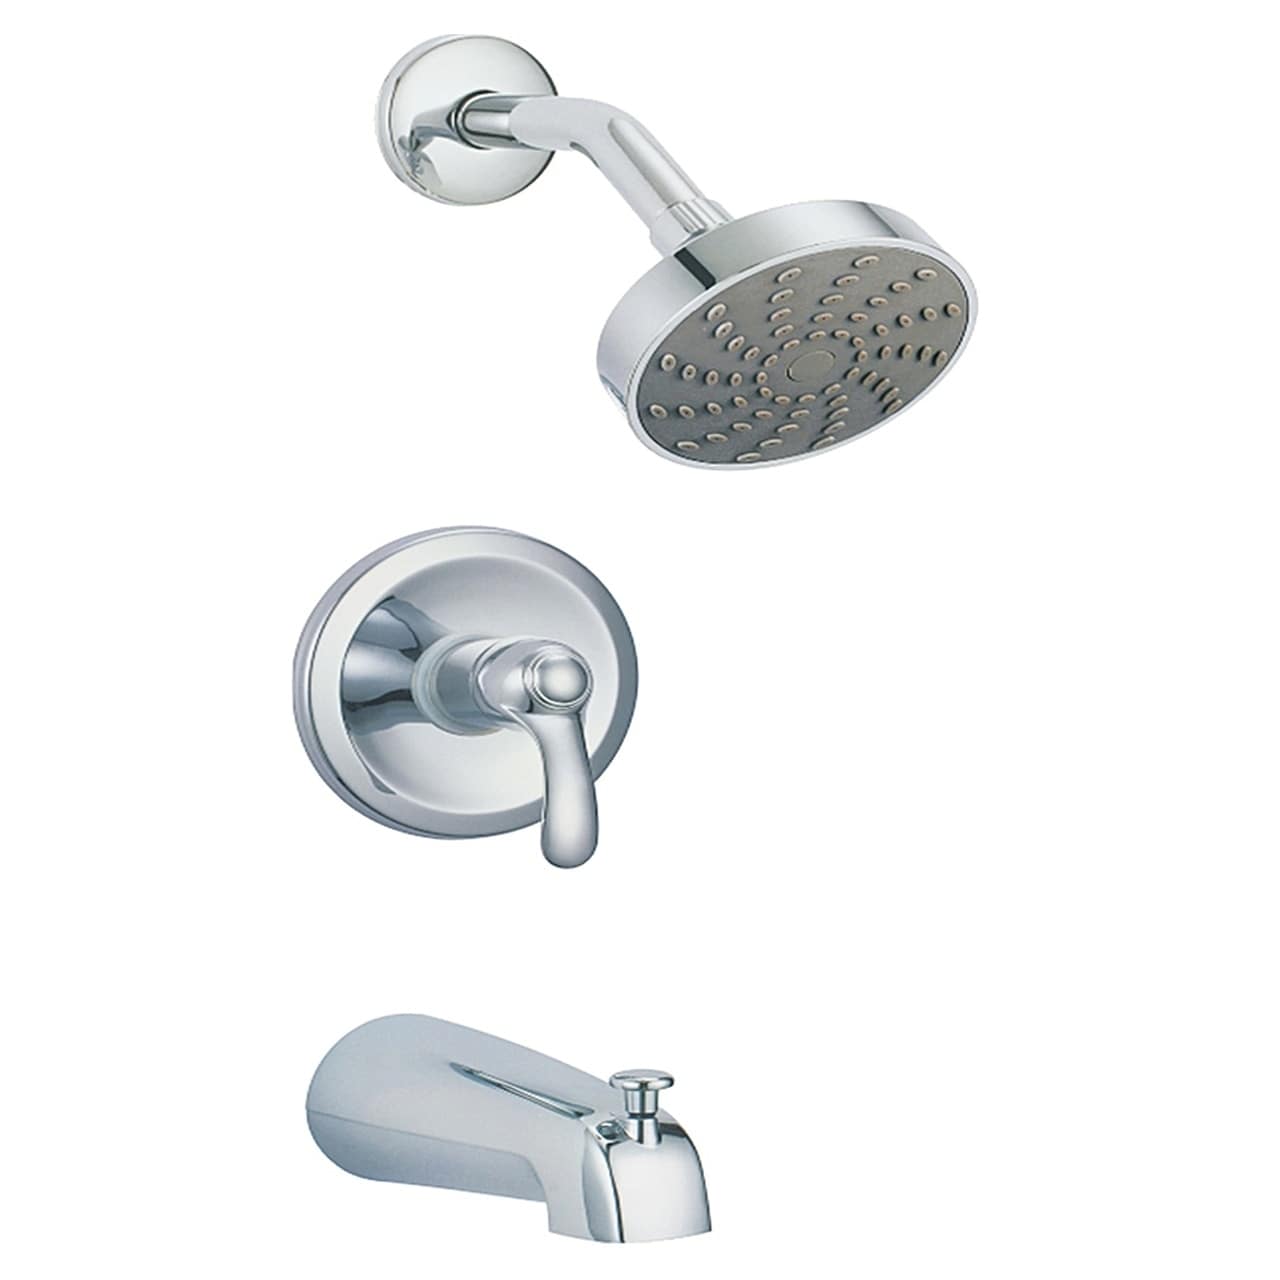 Rhine 2.0 GPM Single Function Shower Head with Faucet - Chrome Finish